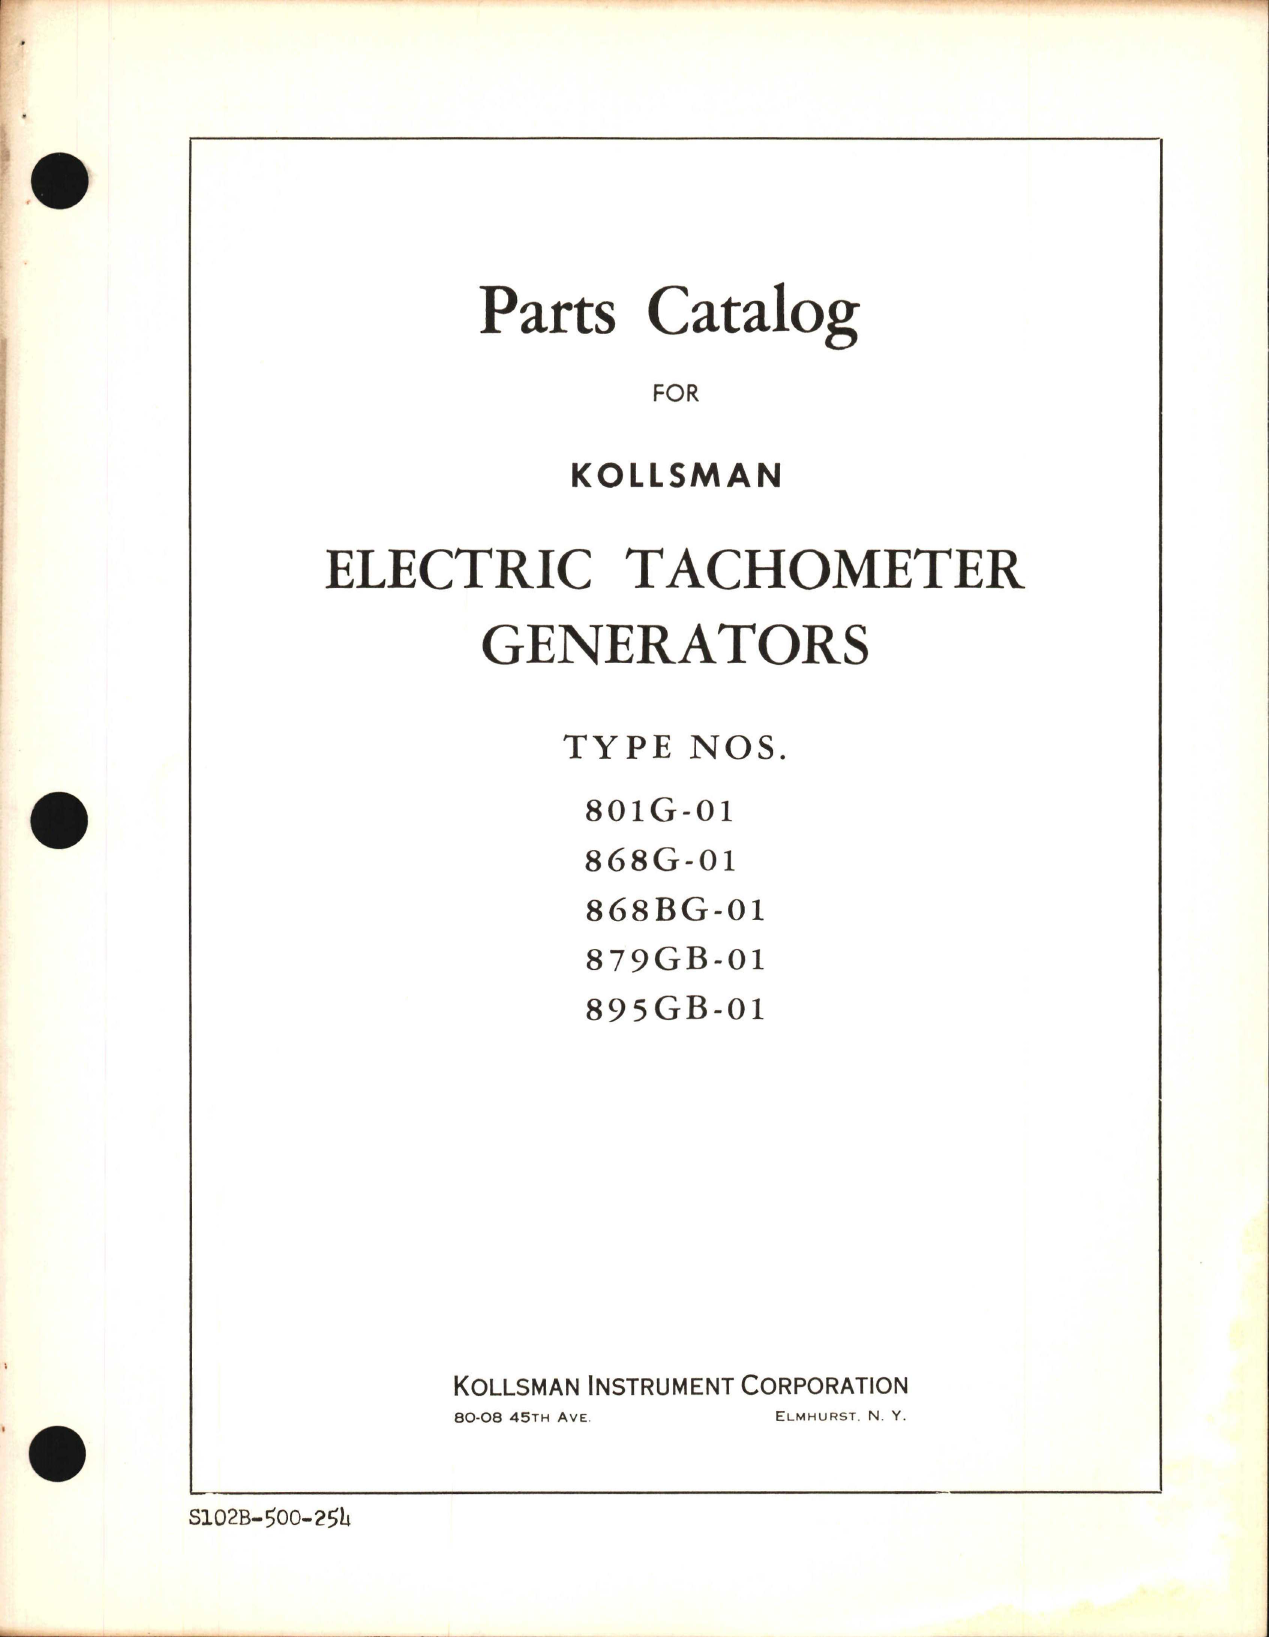 Sample page 1 from AirCorps Library document: Parts Catalog for Kollsman Electric Tachometer Generators